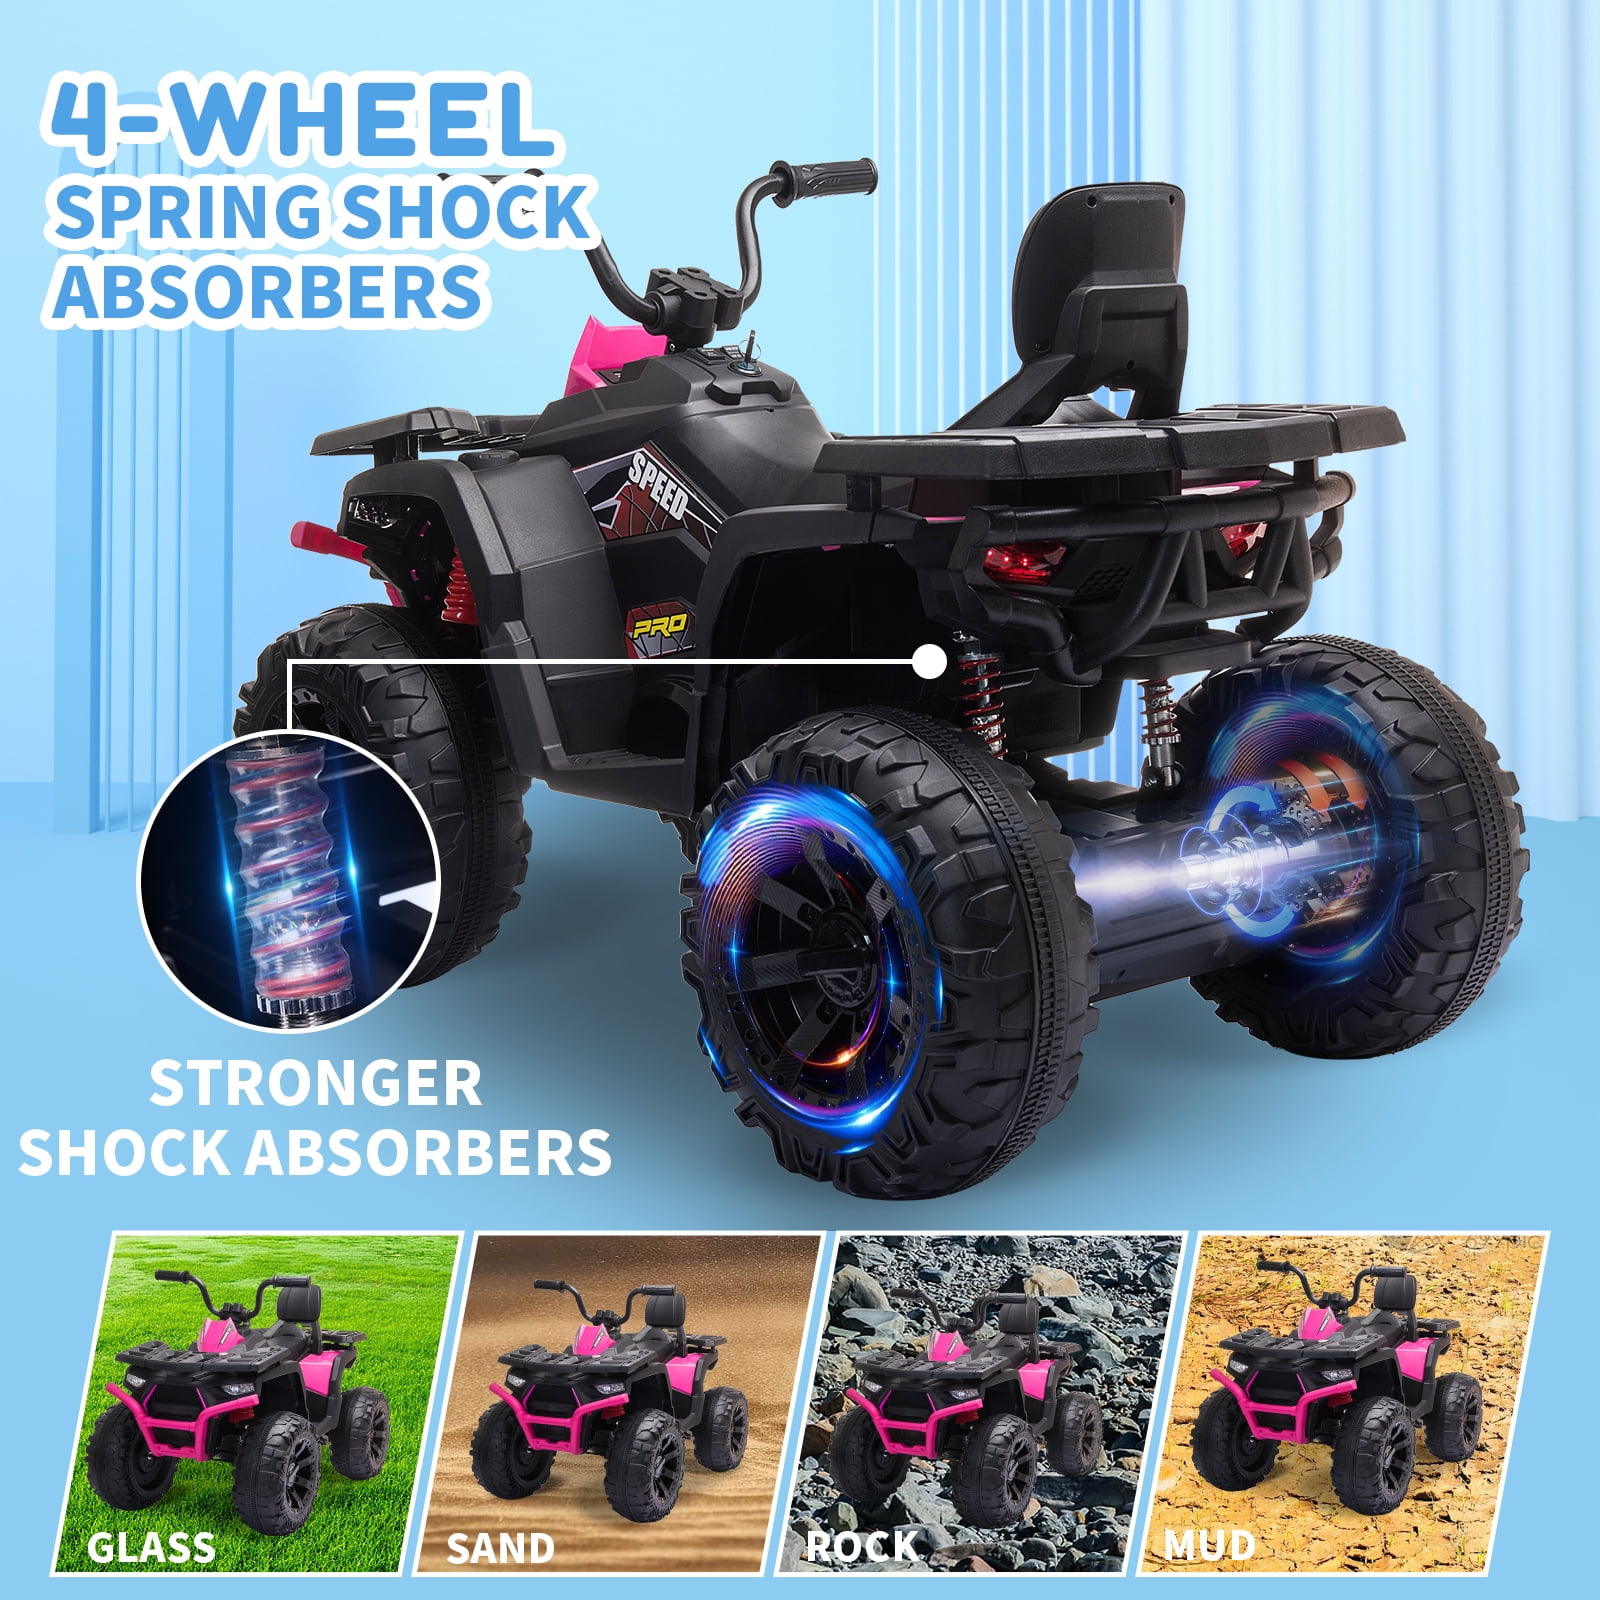 Joyracer 24V Kids Ride on ATV with 2 Seater, 2* 200W Motor 9AH Battery Powered Electric Car w/ LED Lights, High & Low Speed, Music, Suspension, Ride on Toy 4 Wheeler Quad for Boys Girls, Rose Red